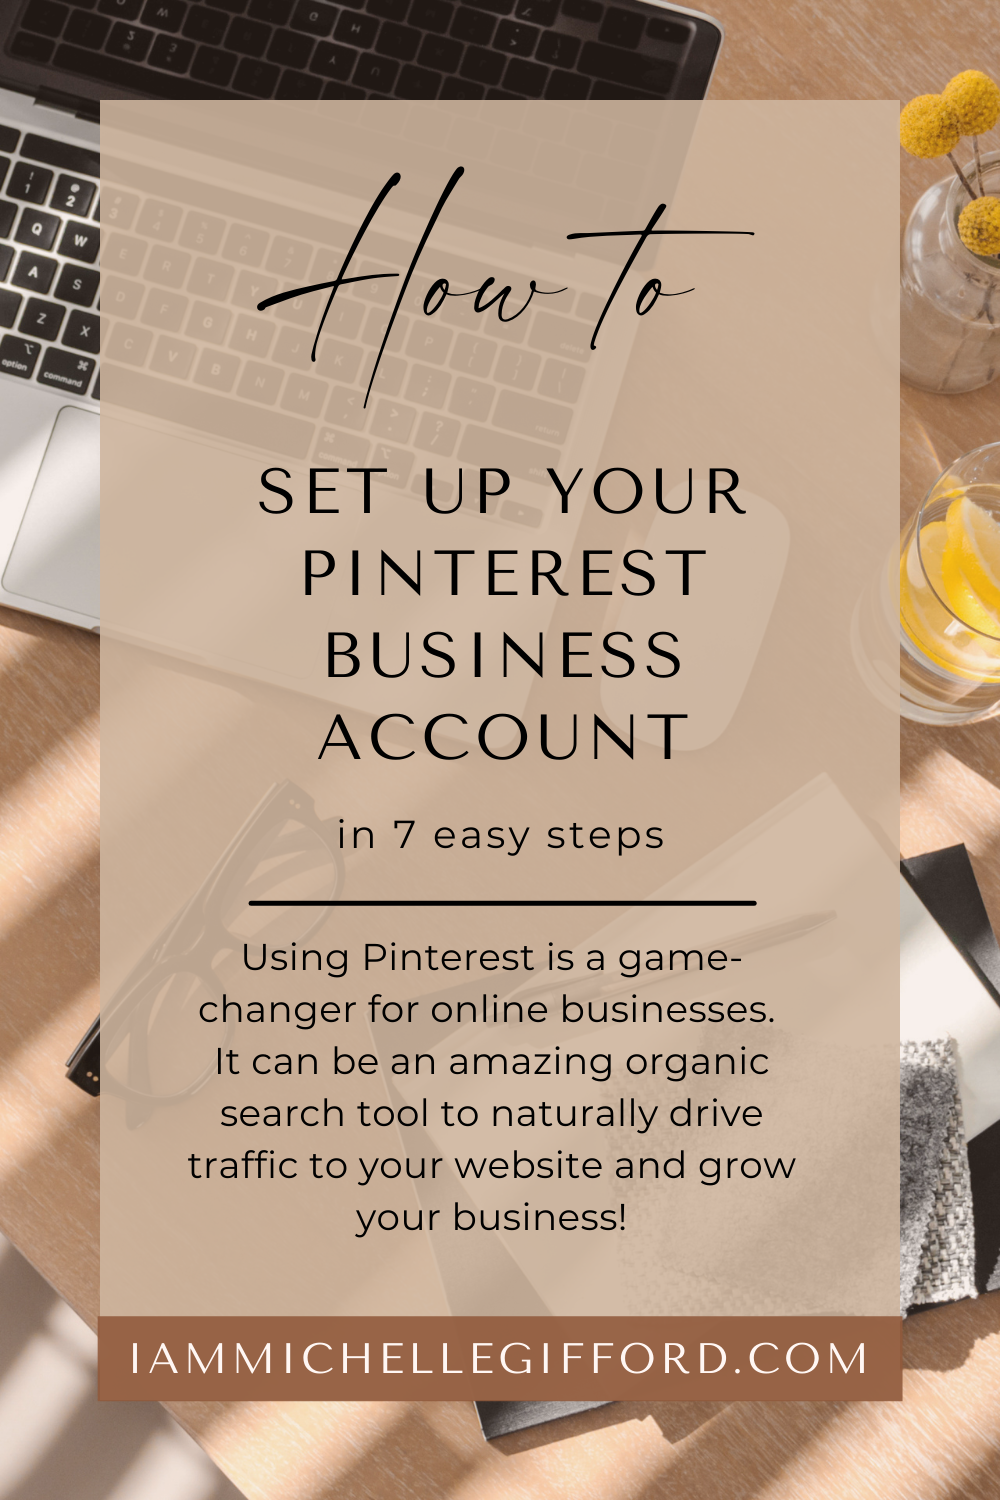 Guide on how to set up your pinterest business account iammichellegifford.com.